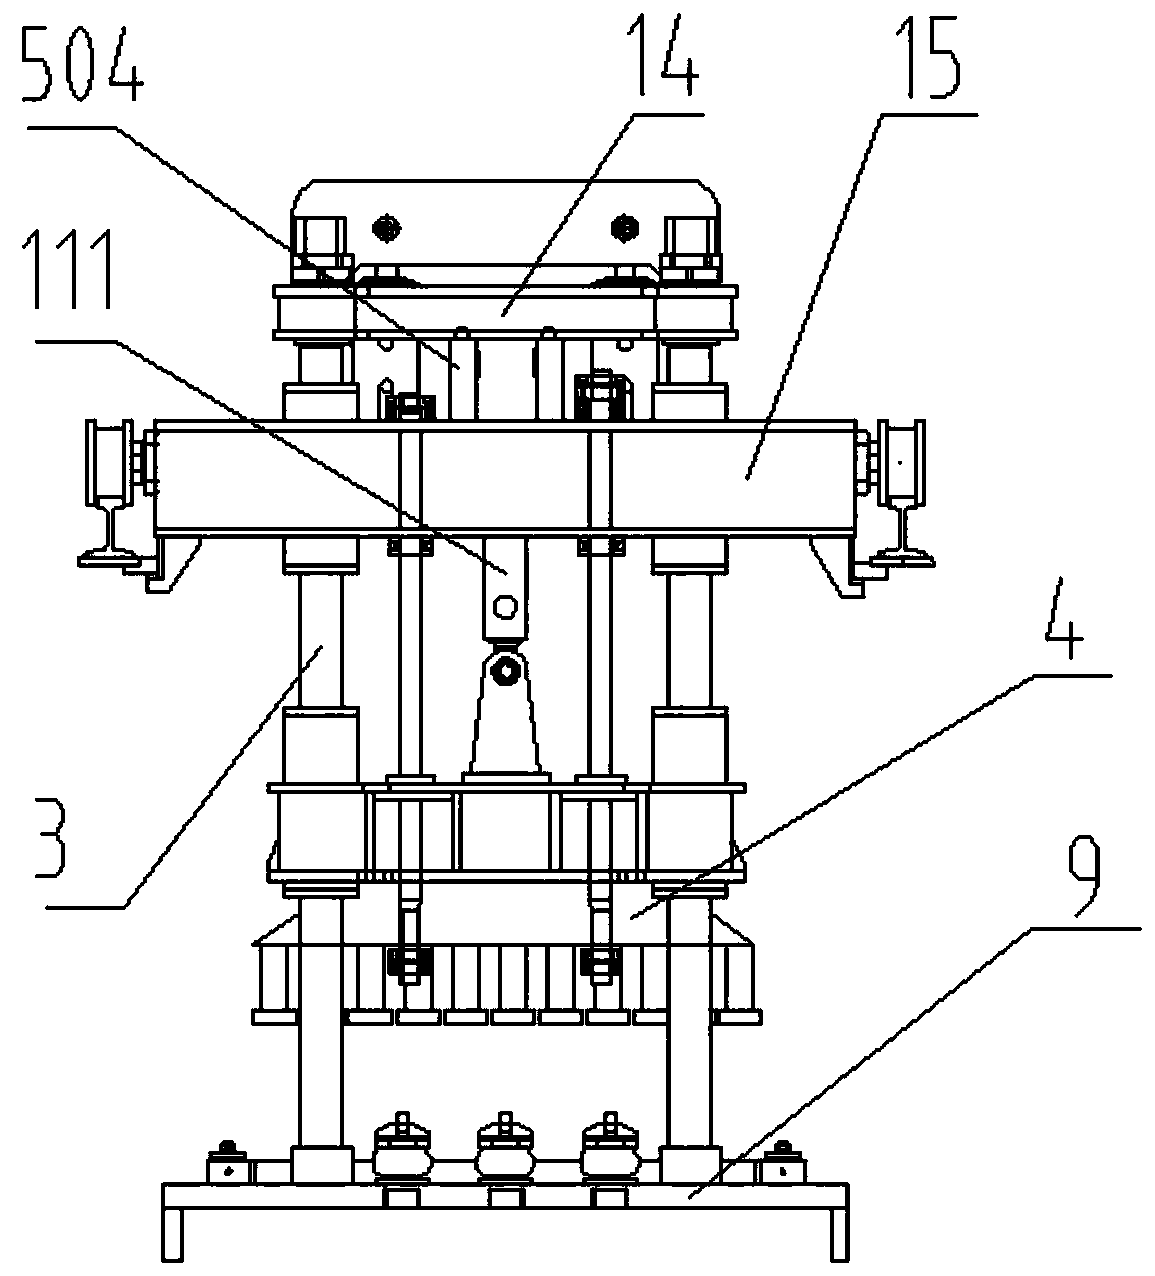 Hydraulic control system of building block forming machine